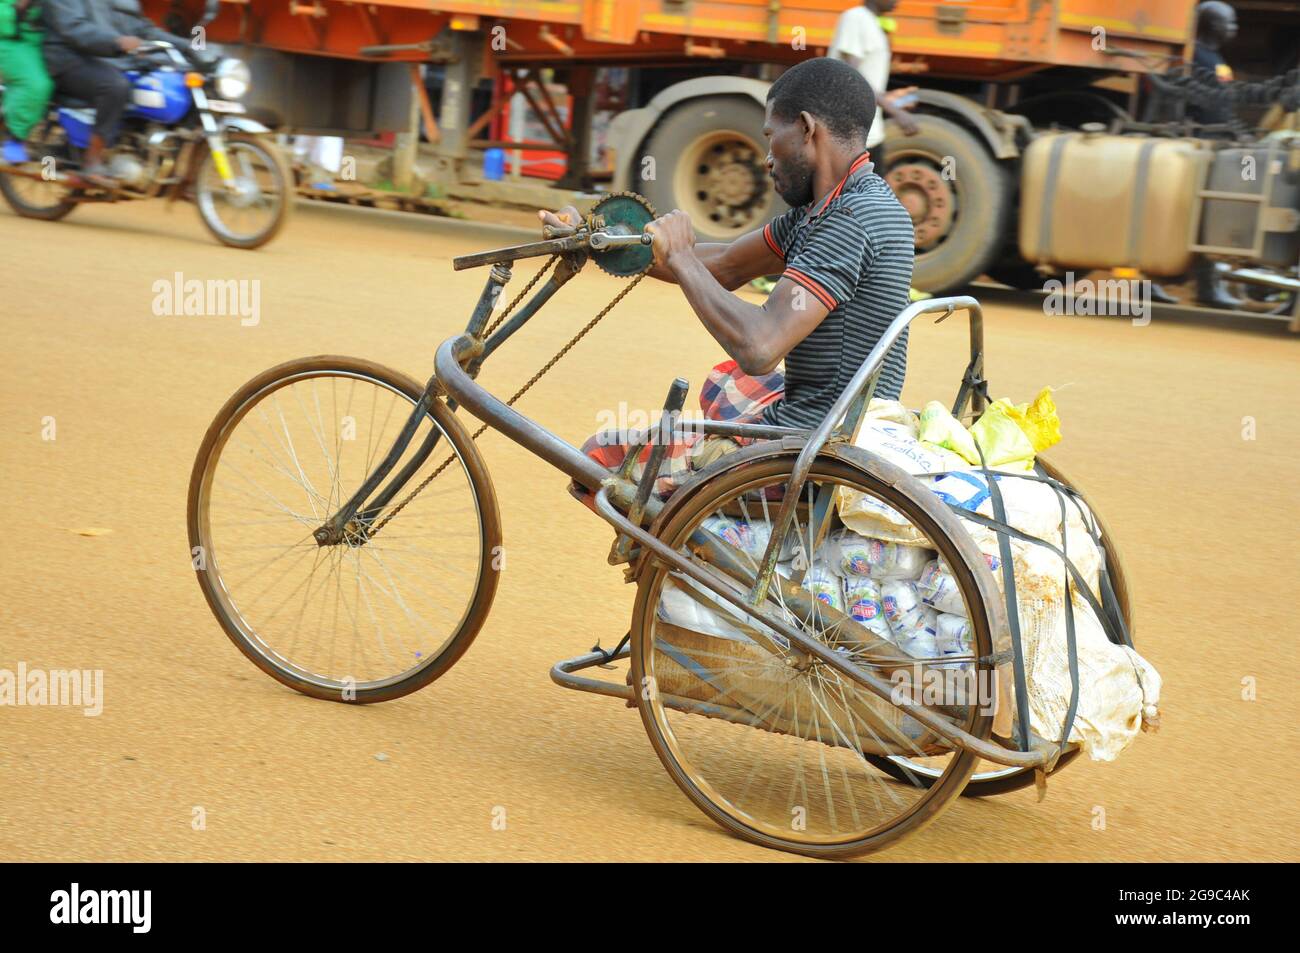 A man with a disability ridding a special designed wheel chair. The wheel chair is designed for transporting goods bought to Uganda from Kenya. The artisans came up with these designs to allow people with disability free movement and for daily living. Because of these specially designed wheel chairs people with disabilities can enjoy some of the same rights like other people. Uganda. Stock Photo